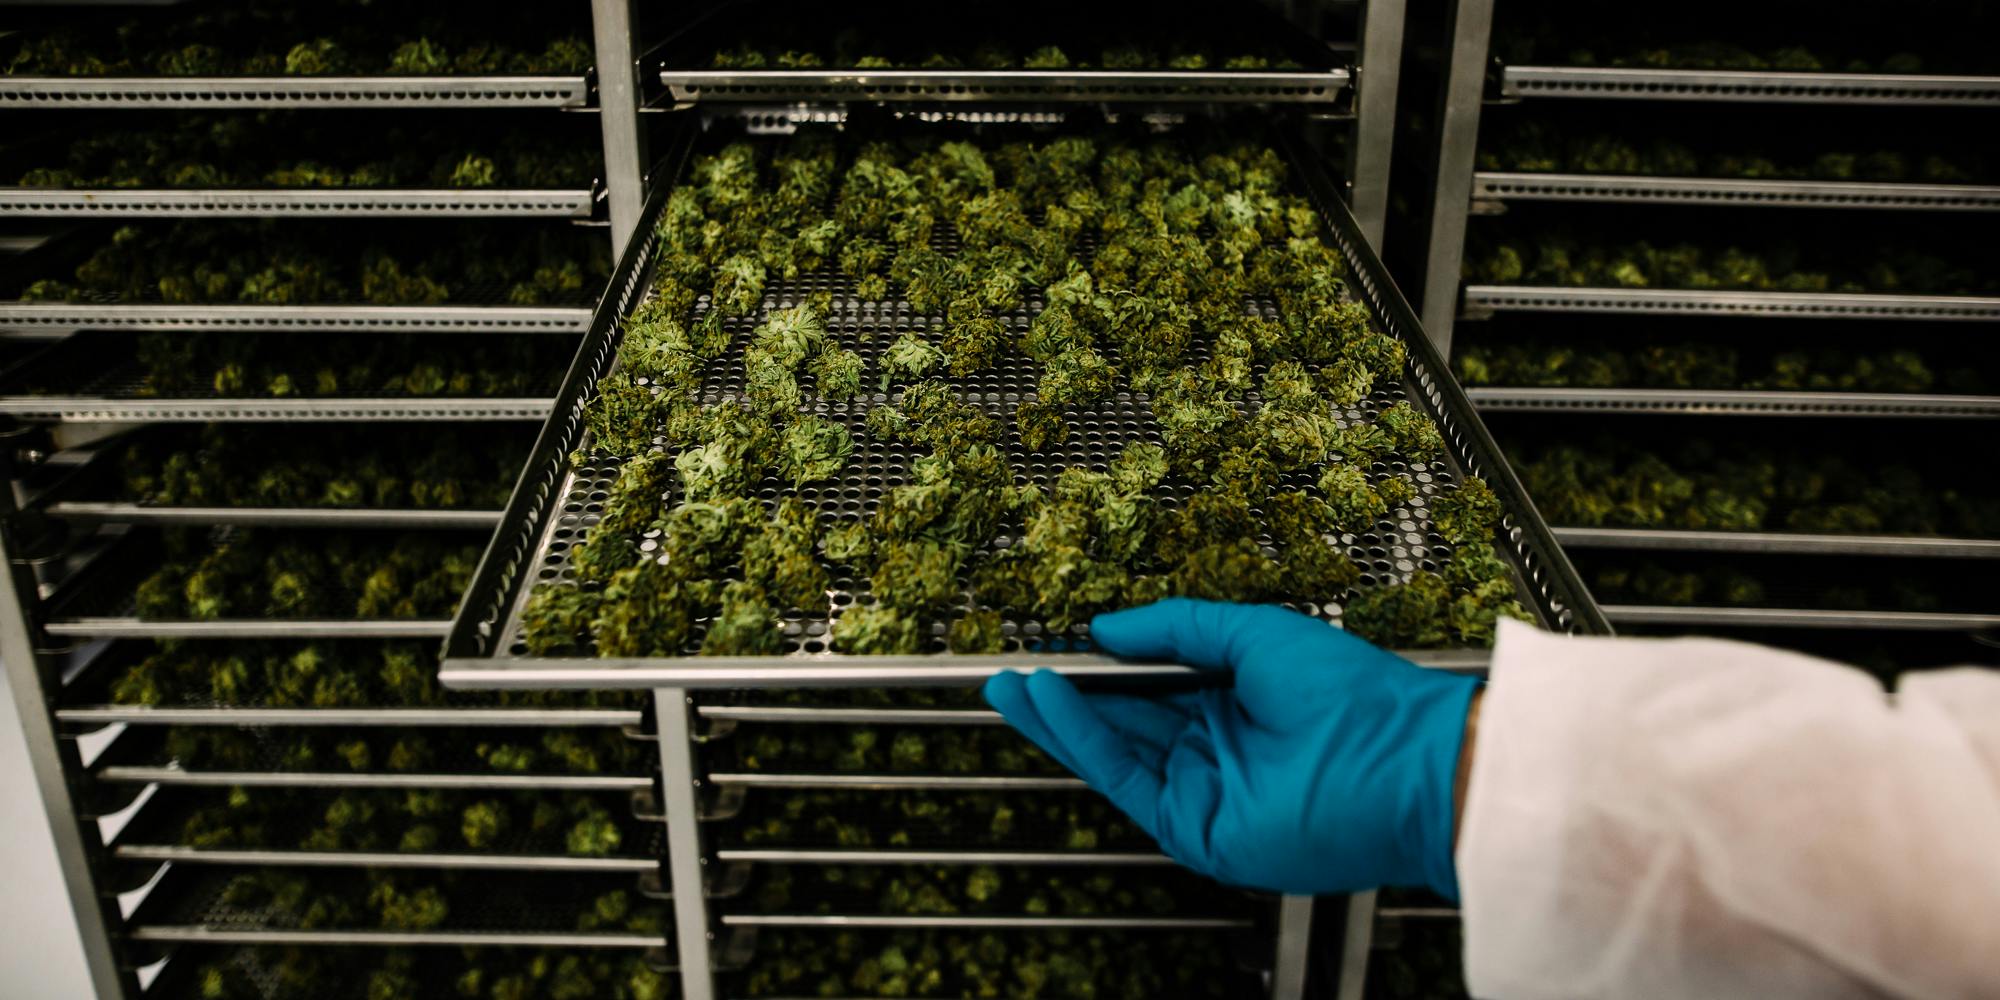 An employee pulls out a tray of drying cannabis buds at the CannTrust Holding Inc. Niagara Perpetual Harvest facility in Pelham, Ontario, Canada, on Wednesday, July 11, 2018. Nova Scotia just announced it'll be the first province in the country to open combined alcohol-cannabis retailers.